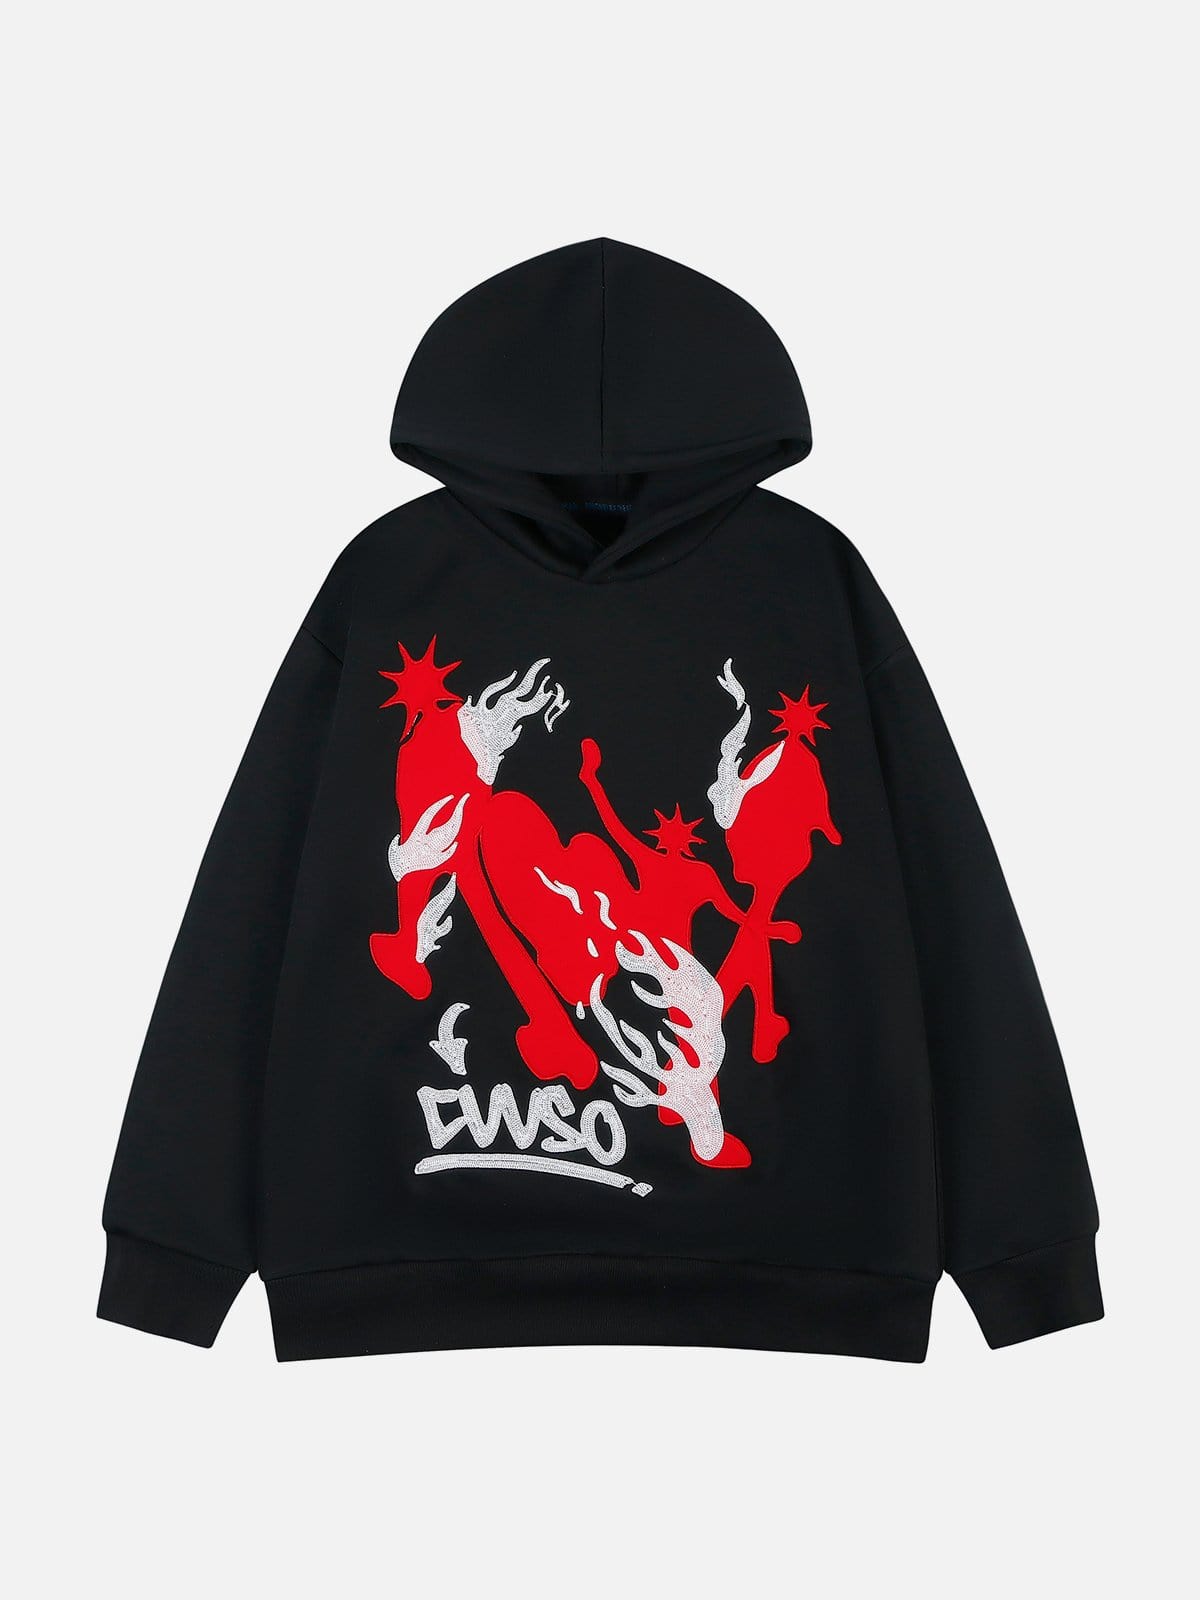 NEV Abstraction Printing Hoodie